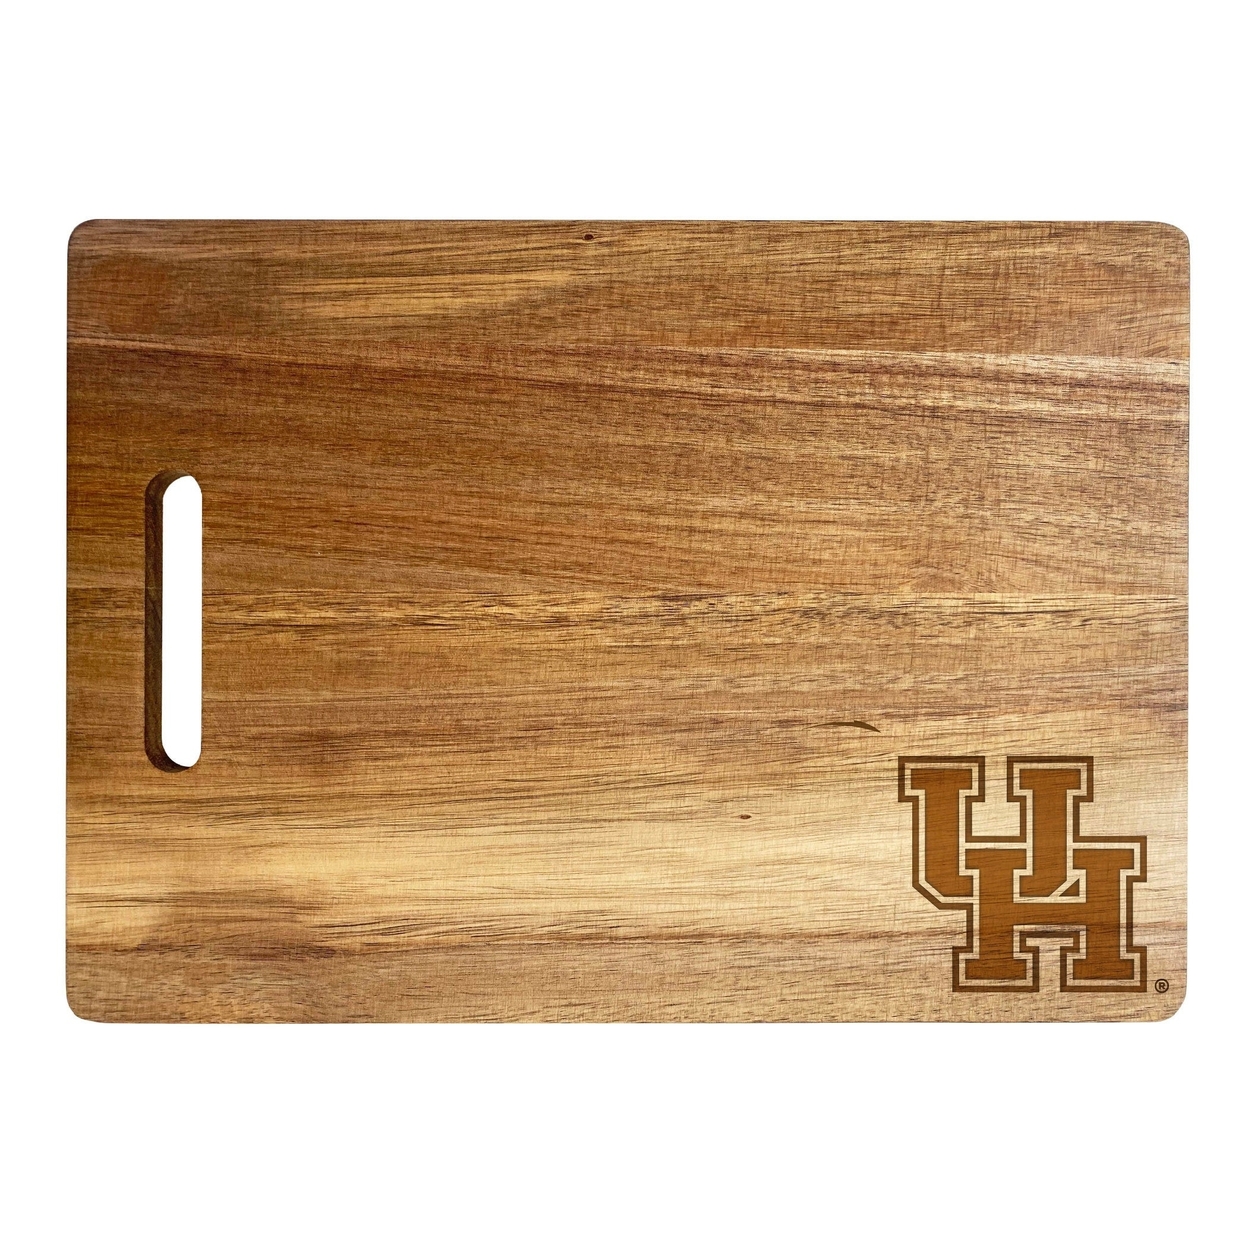 University Of Houston Engraved Wooden Cutting Board 10 X 14 Acacia Wood - Small Engraving